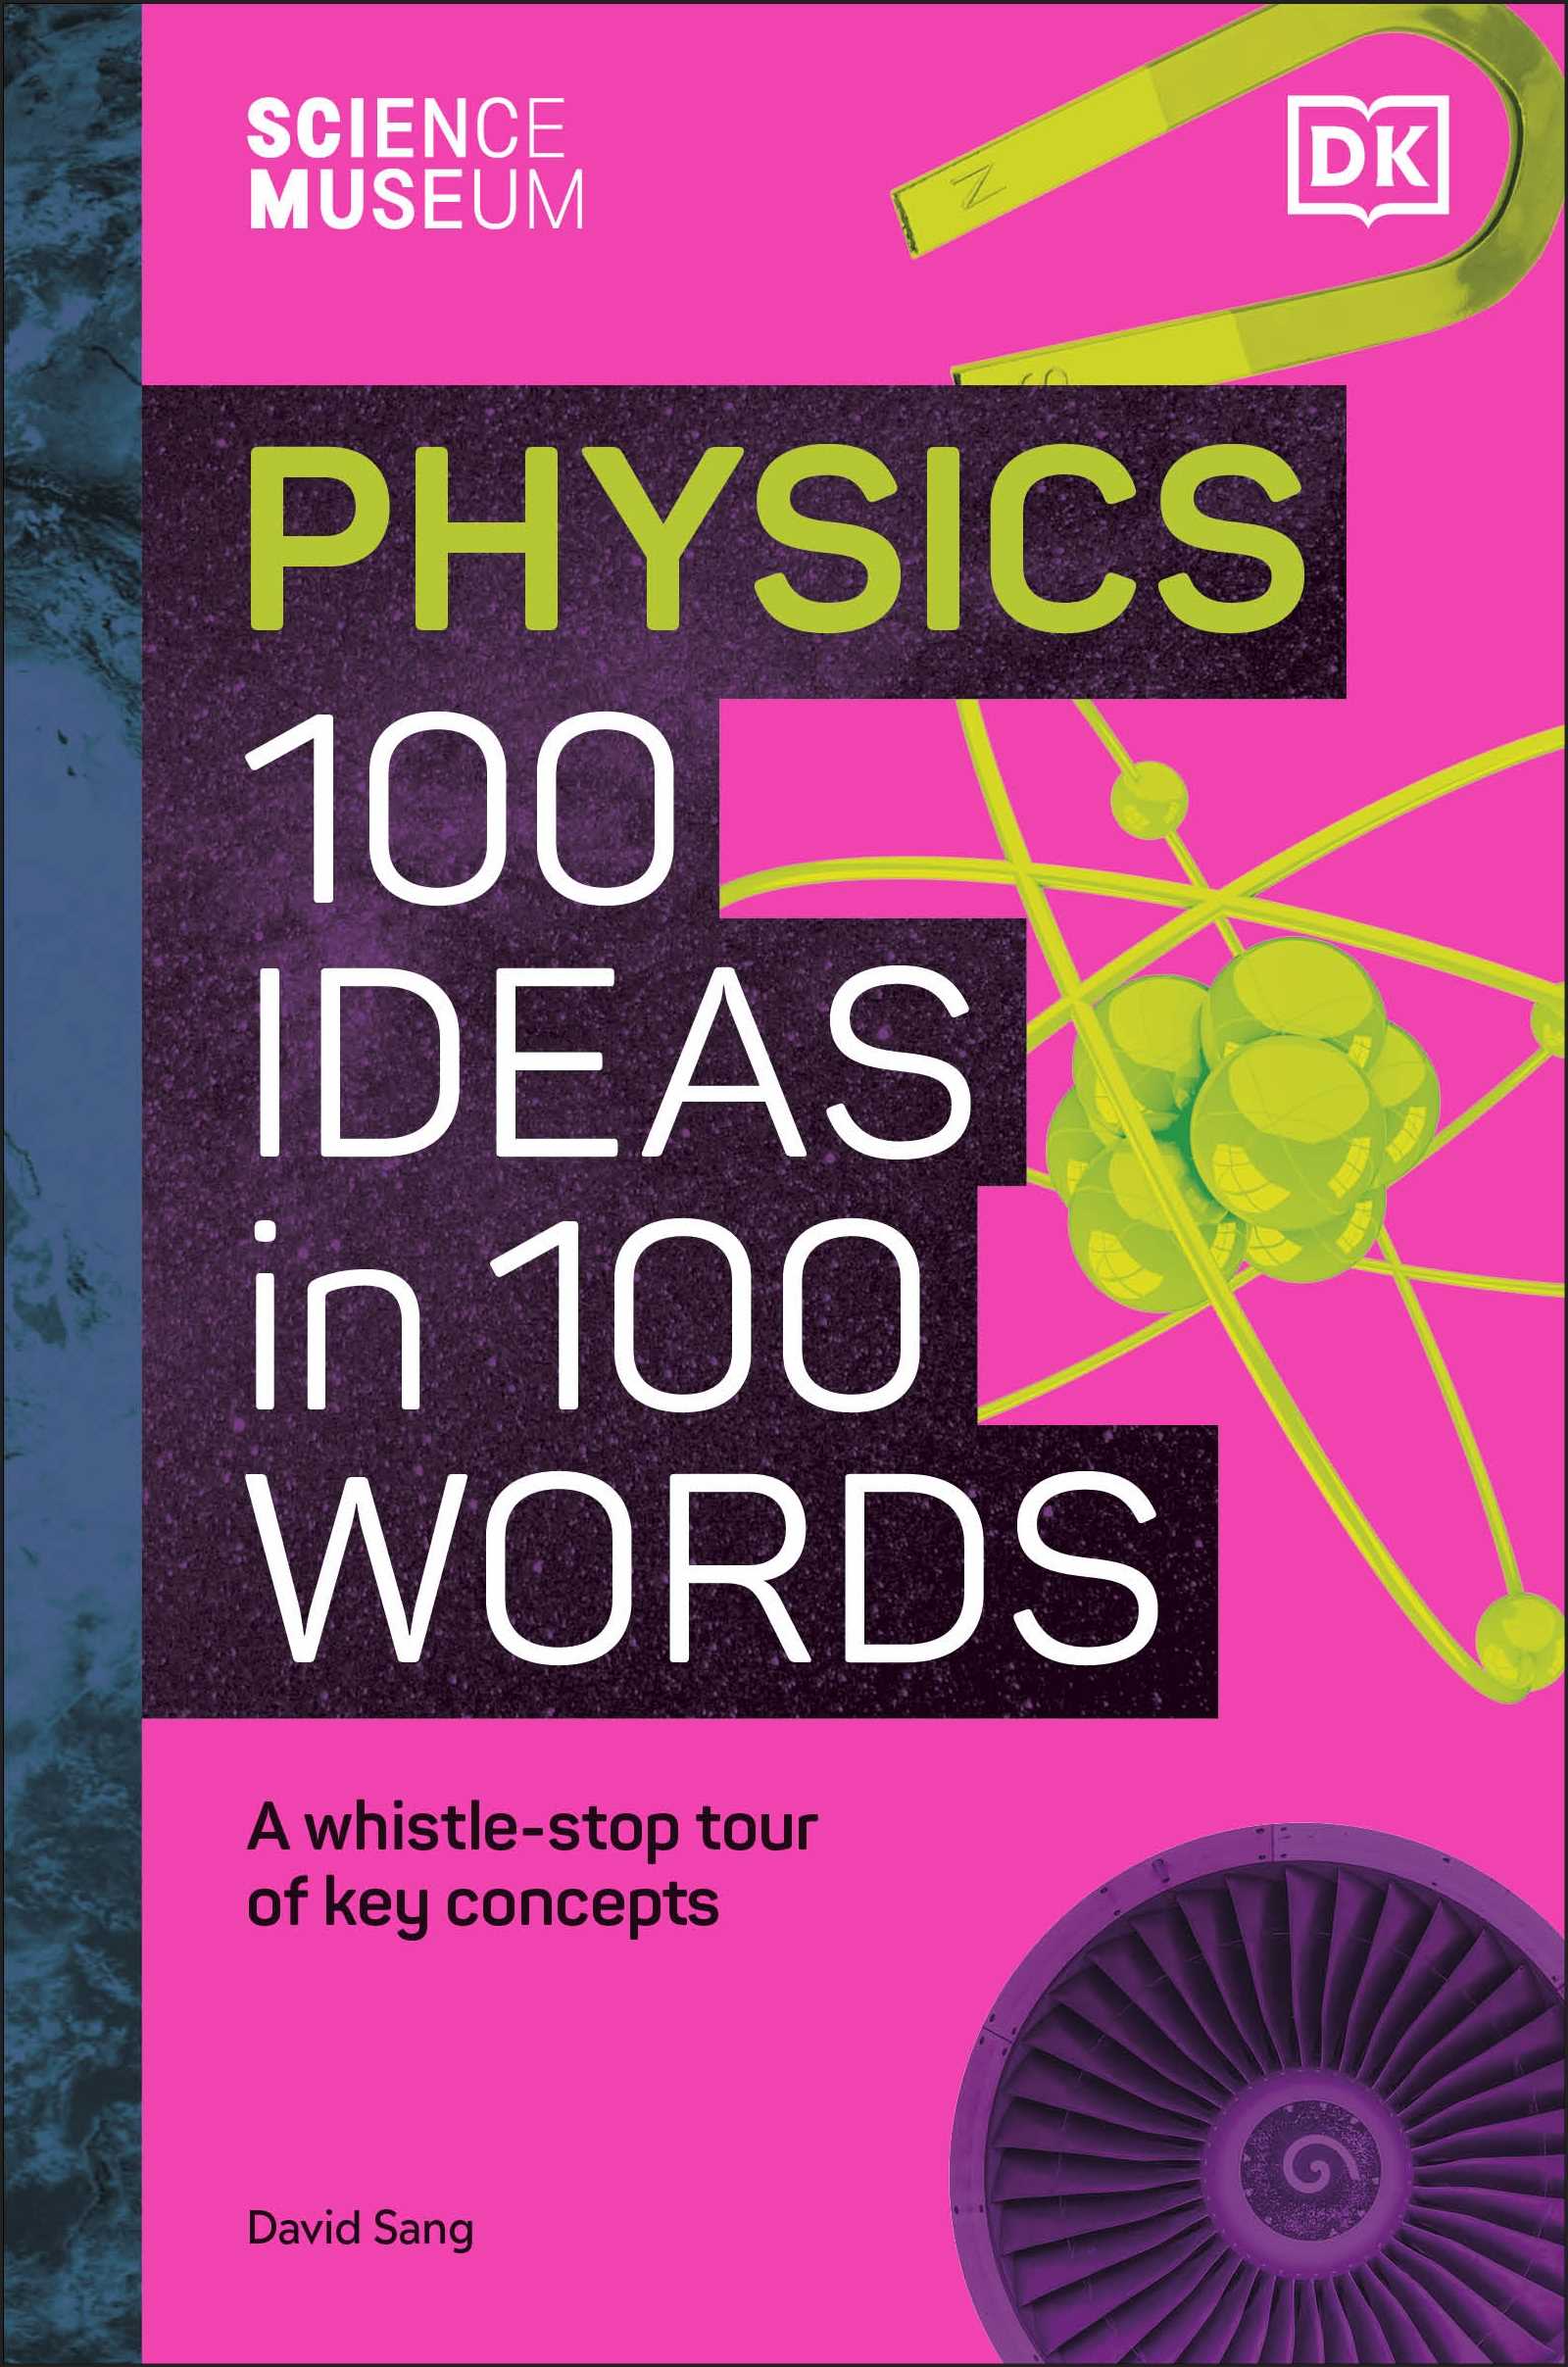 The Science Museum Physics (100 Ideas in 100 Words)